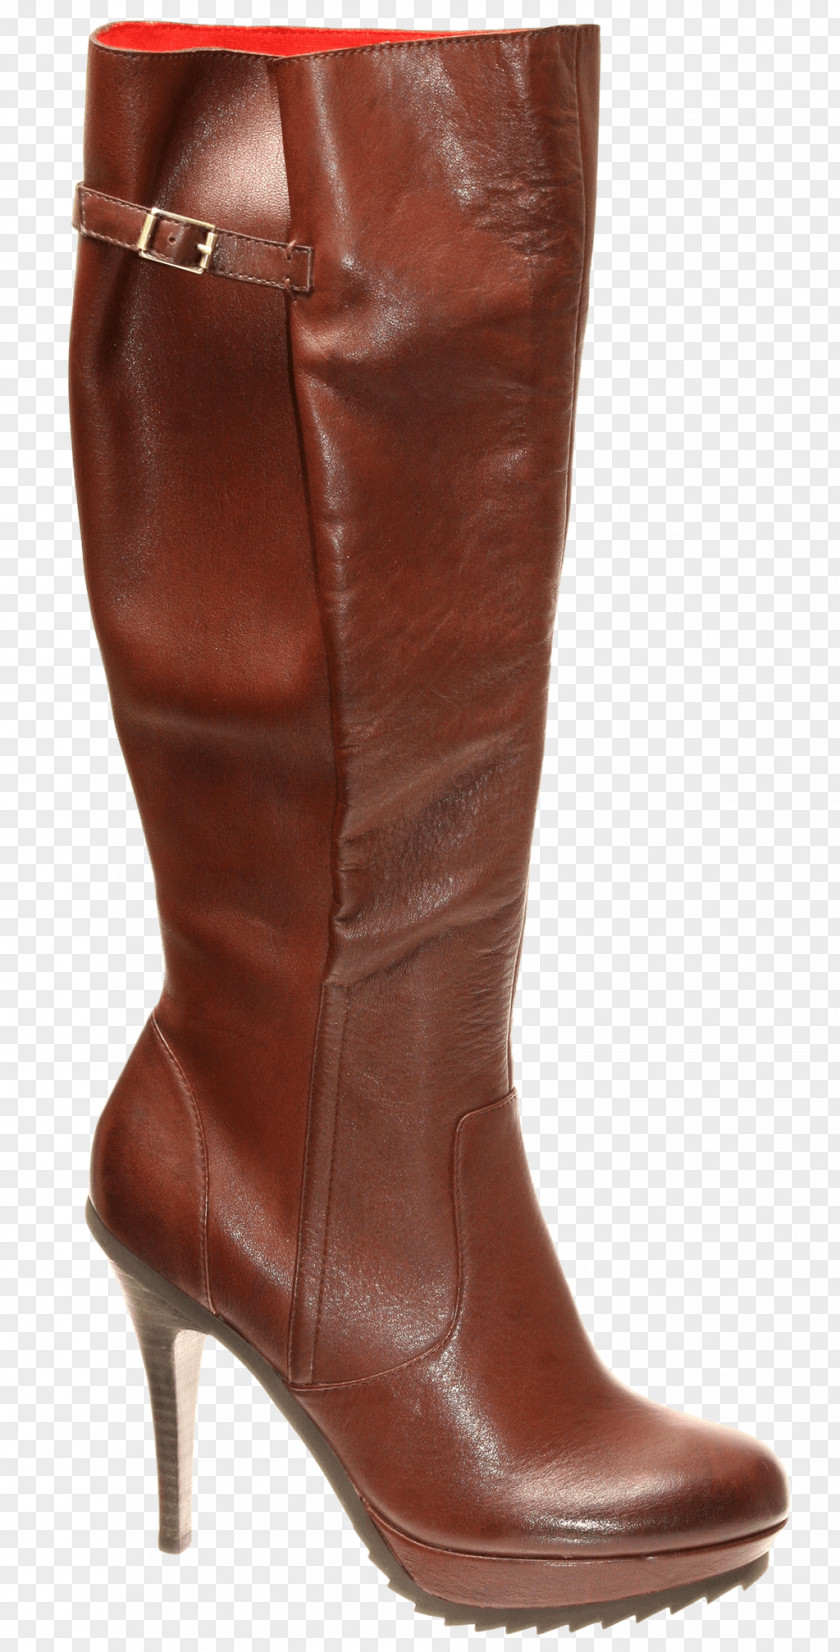 Knee High Boots Riding Boot Shoe Roxy's Place Leather PNG